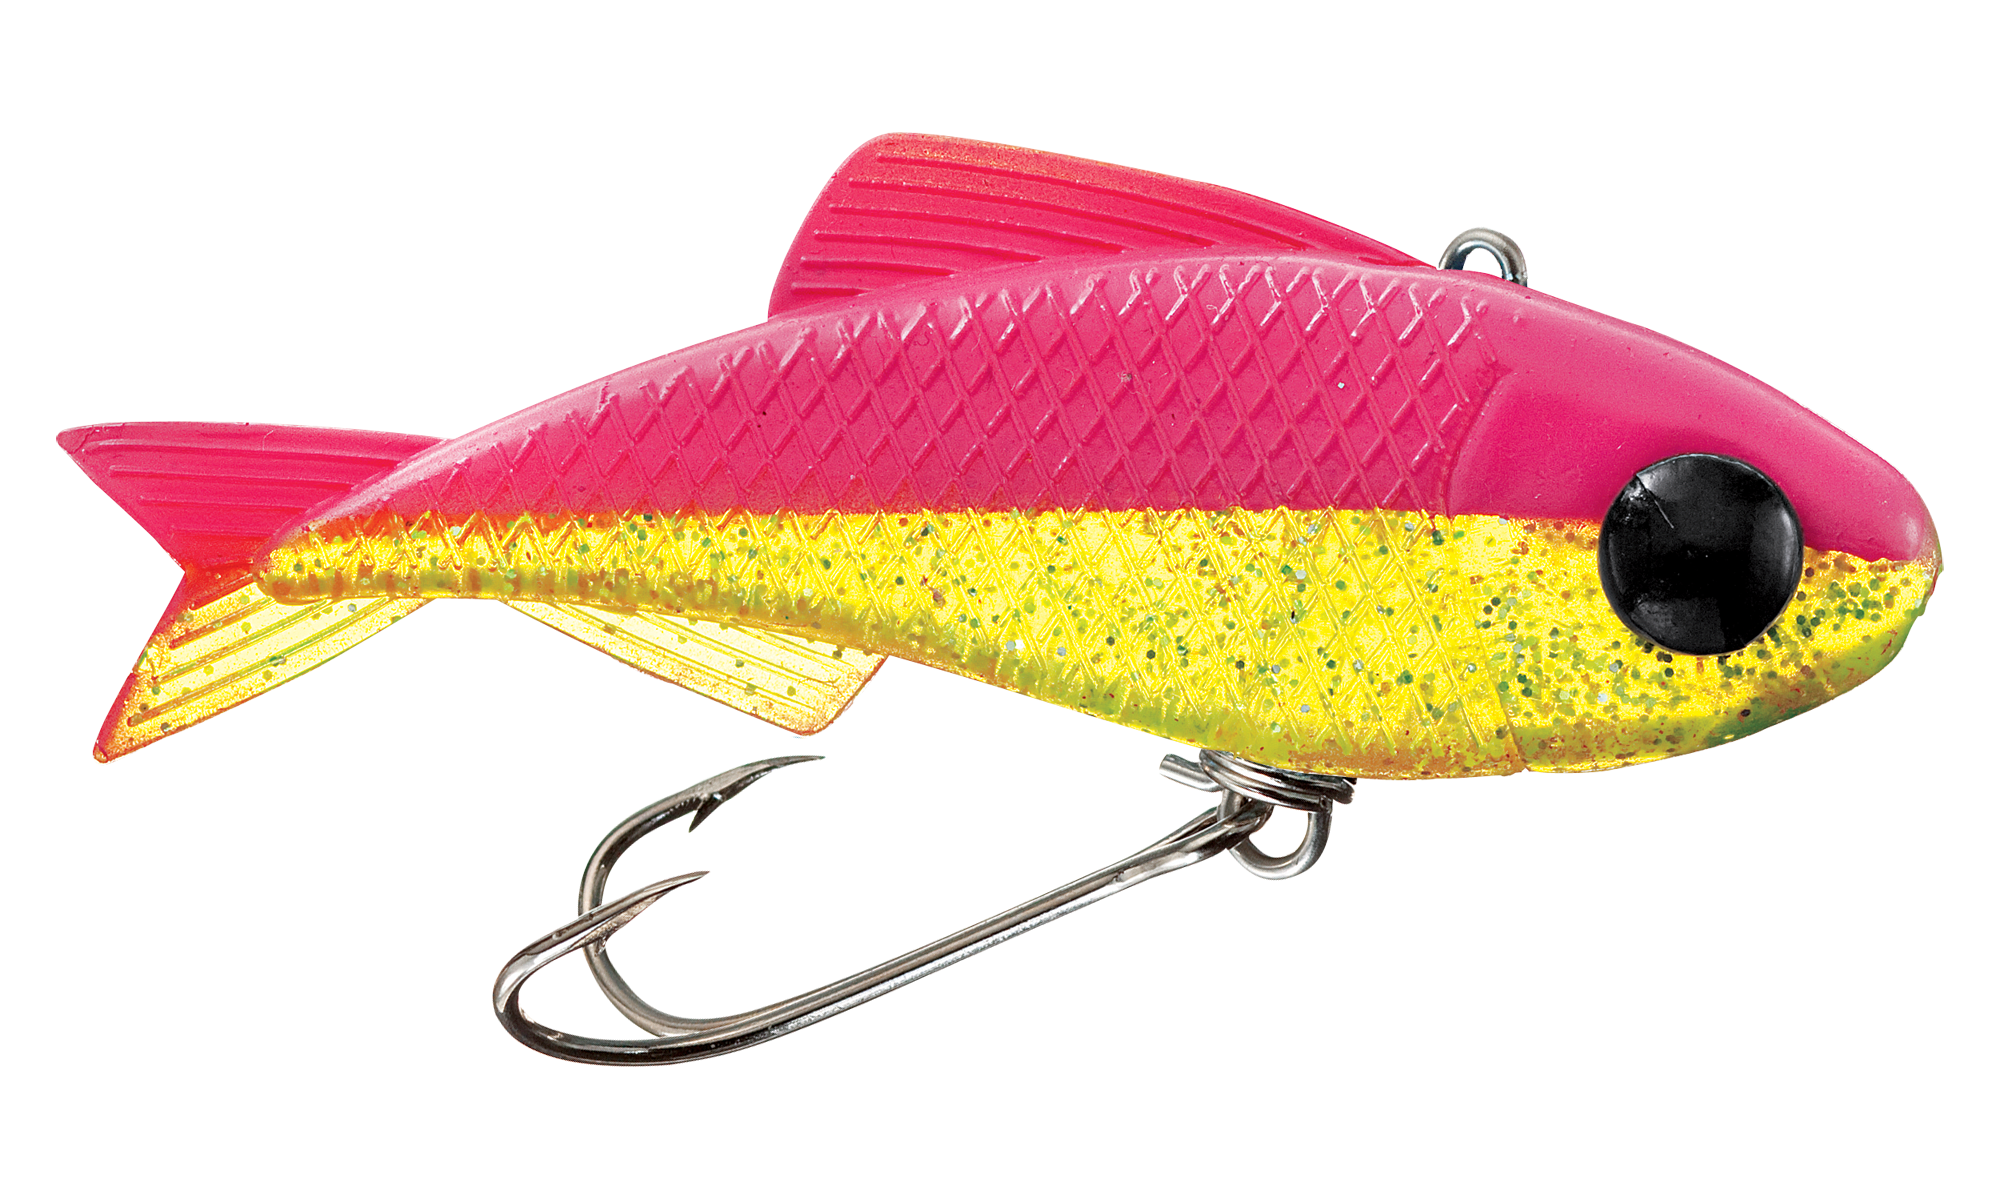 Créme Saltwater Mad Dad Minnows - 2.5"" - Electric Chicken -  Creme